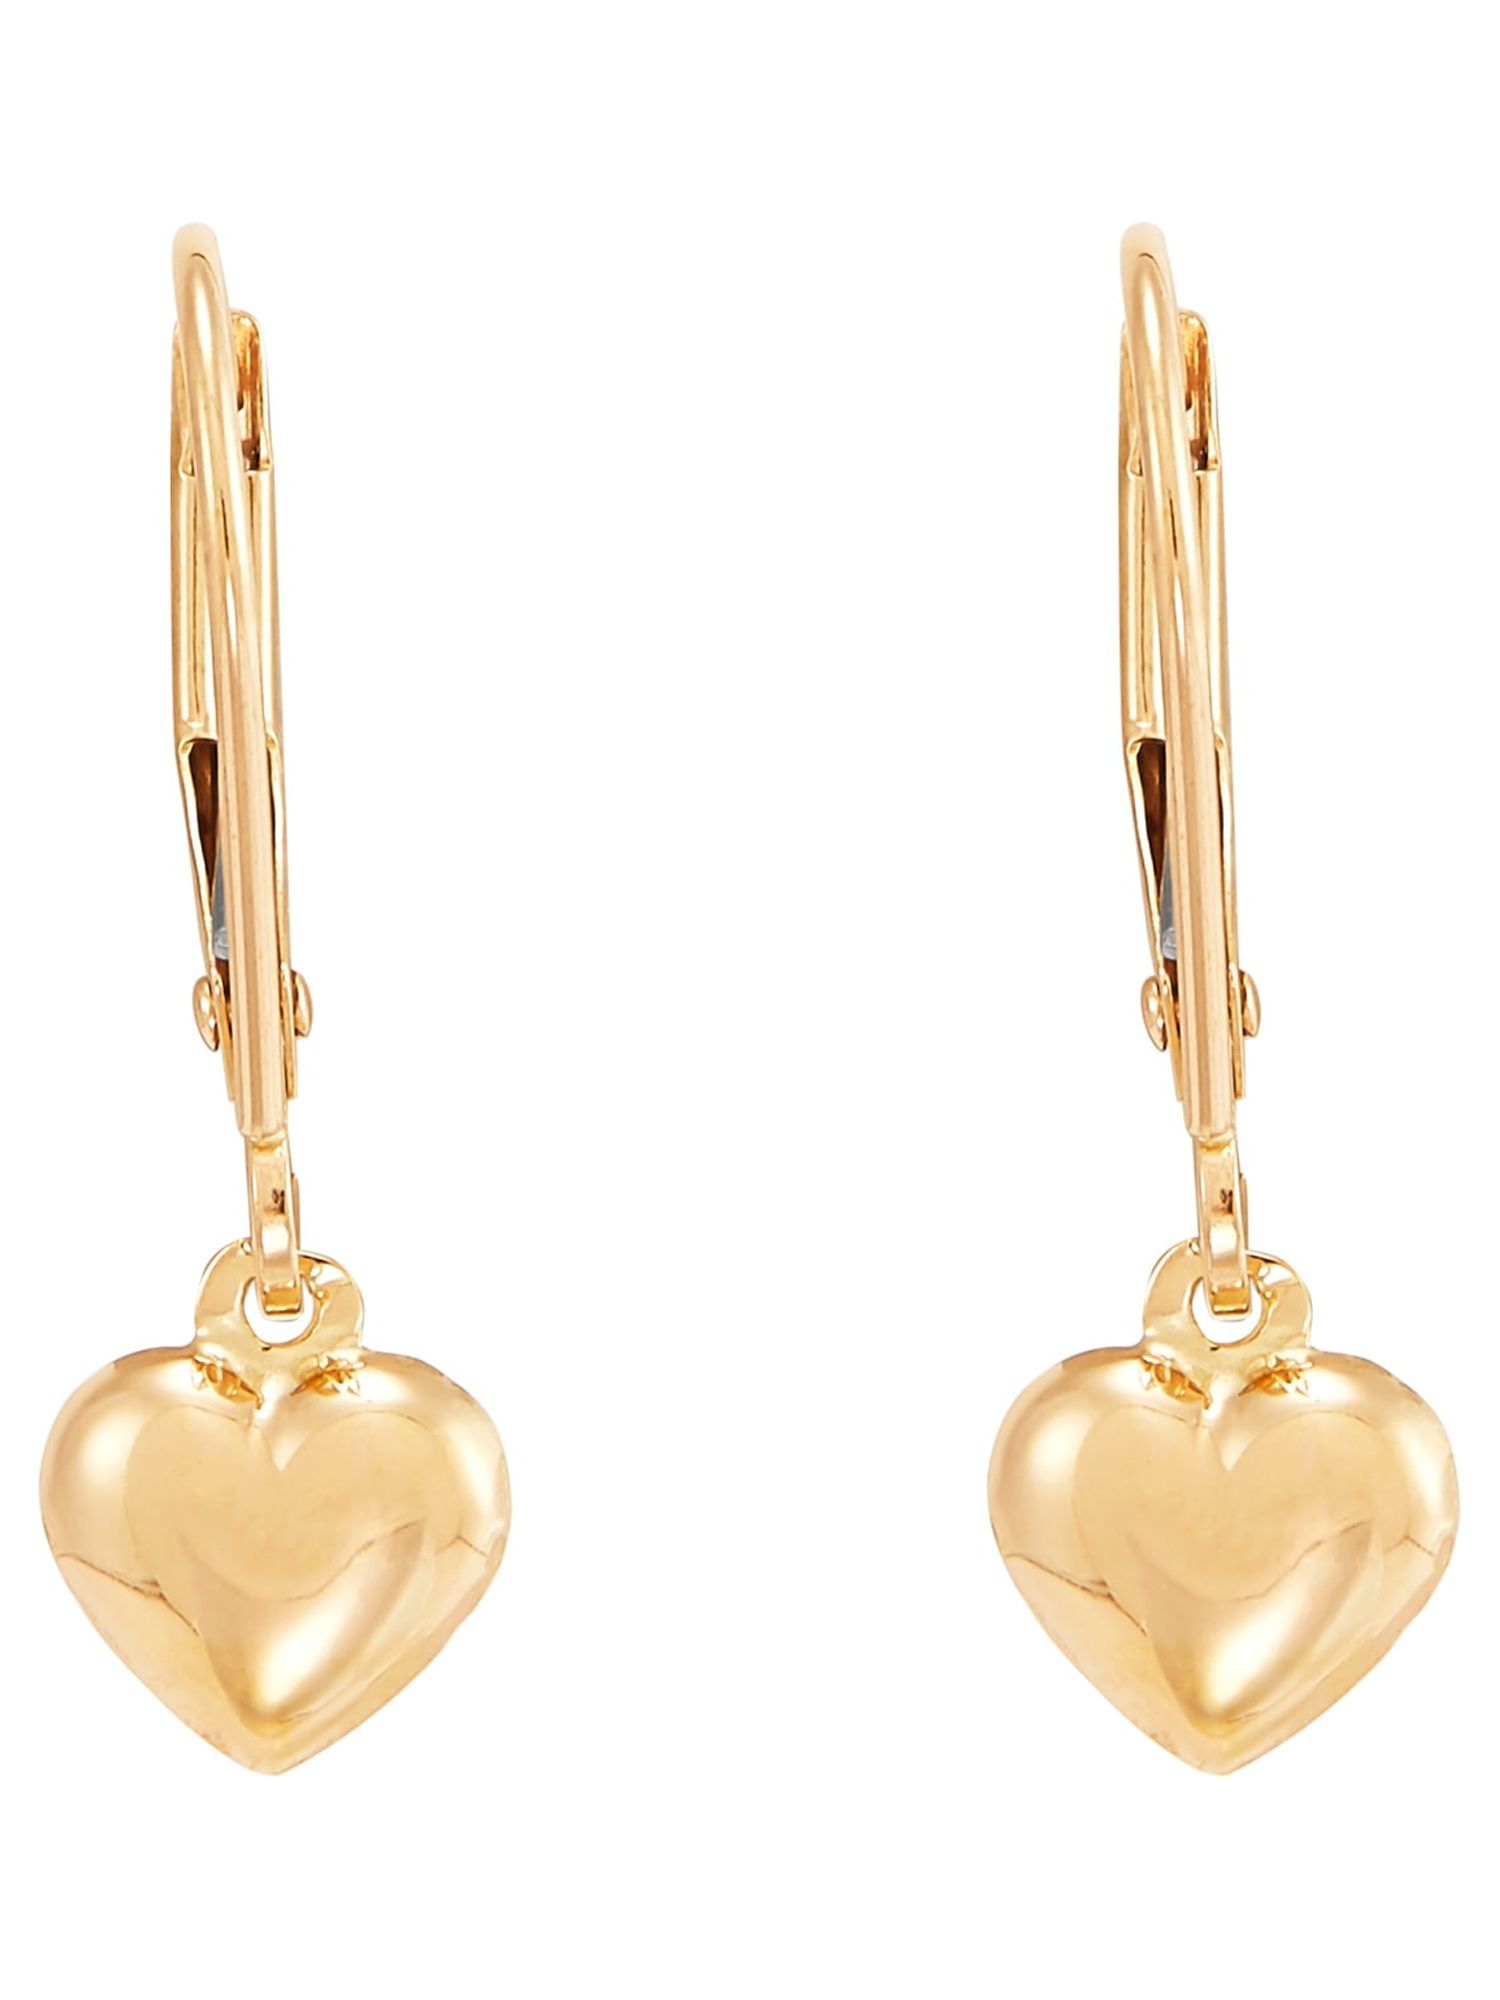 Brilliance Fine Jewelry 10K Yellow Gold Hollow Heart Leverback Earrings - image 1 of 4